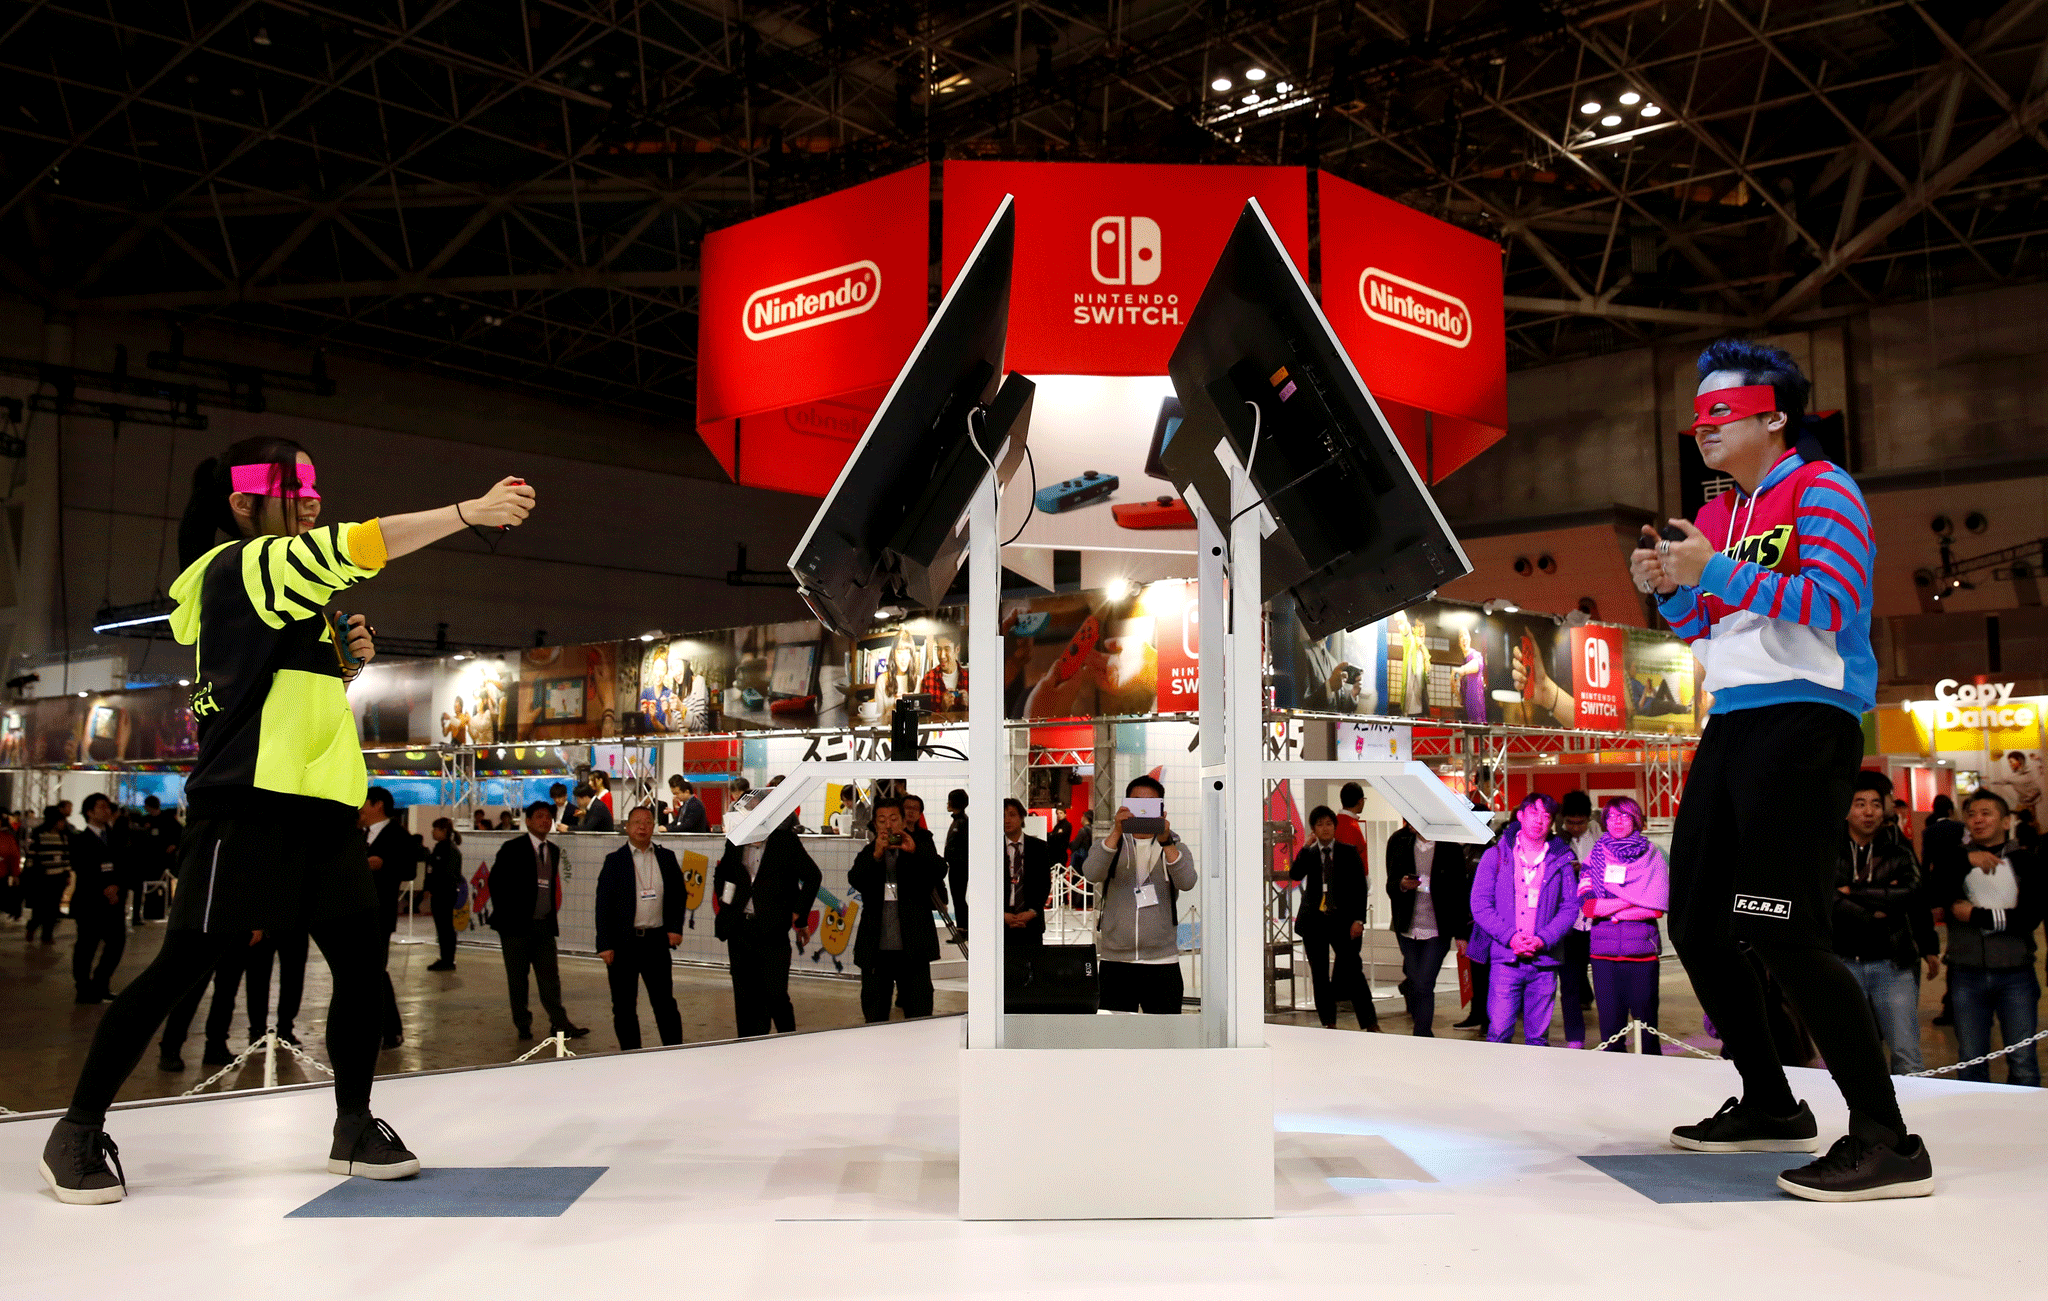 Nintendo Switch price higher than expected, disappointing